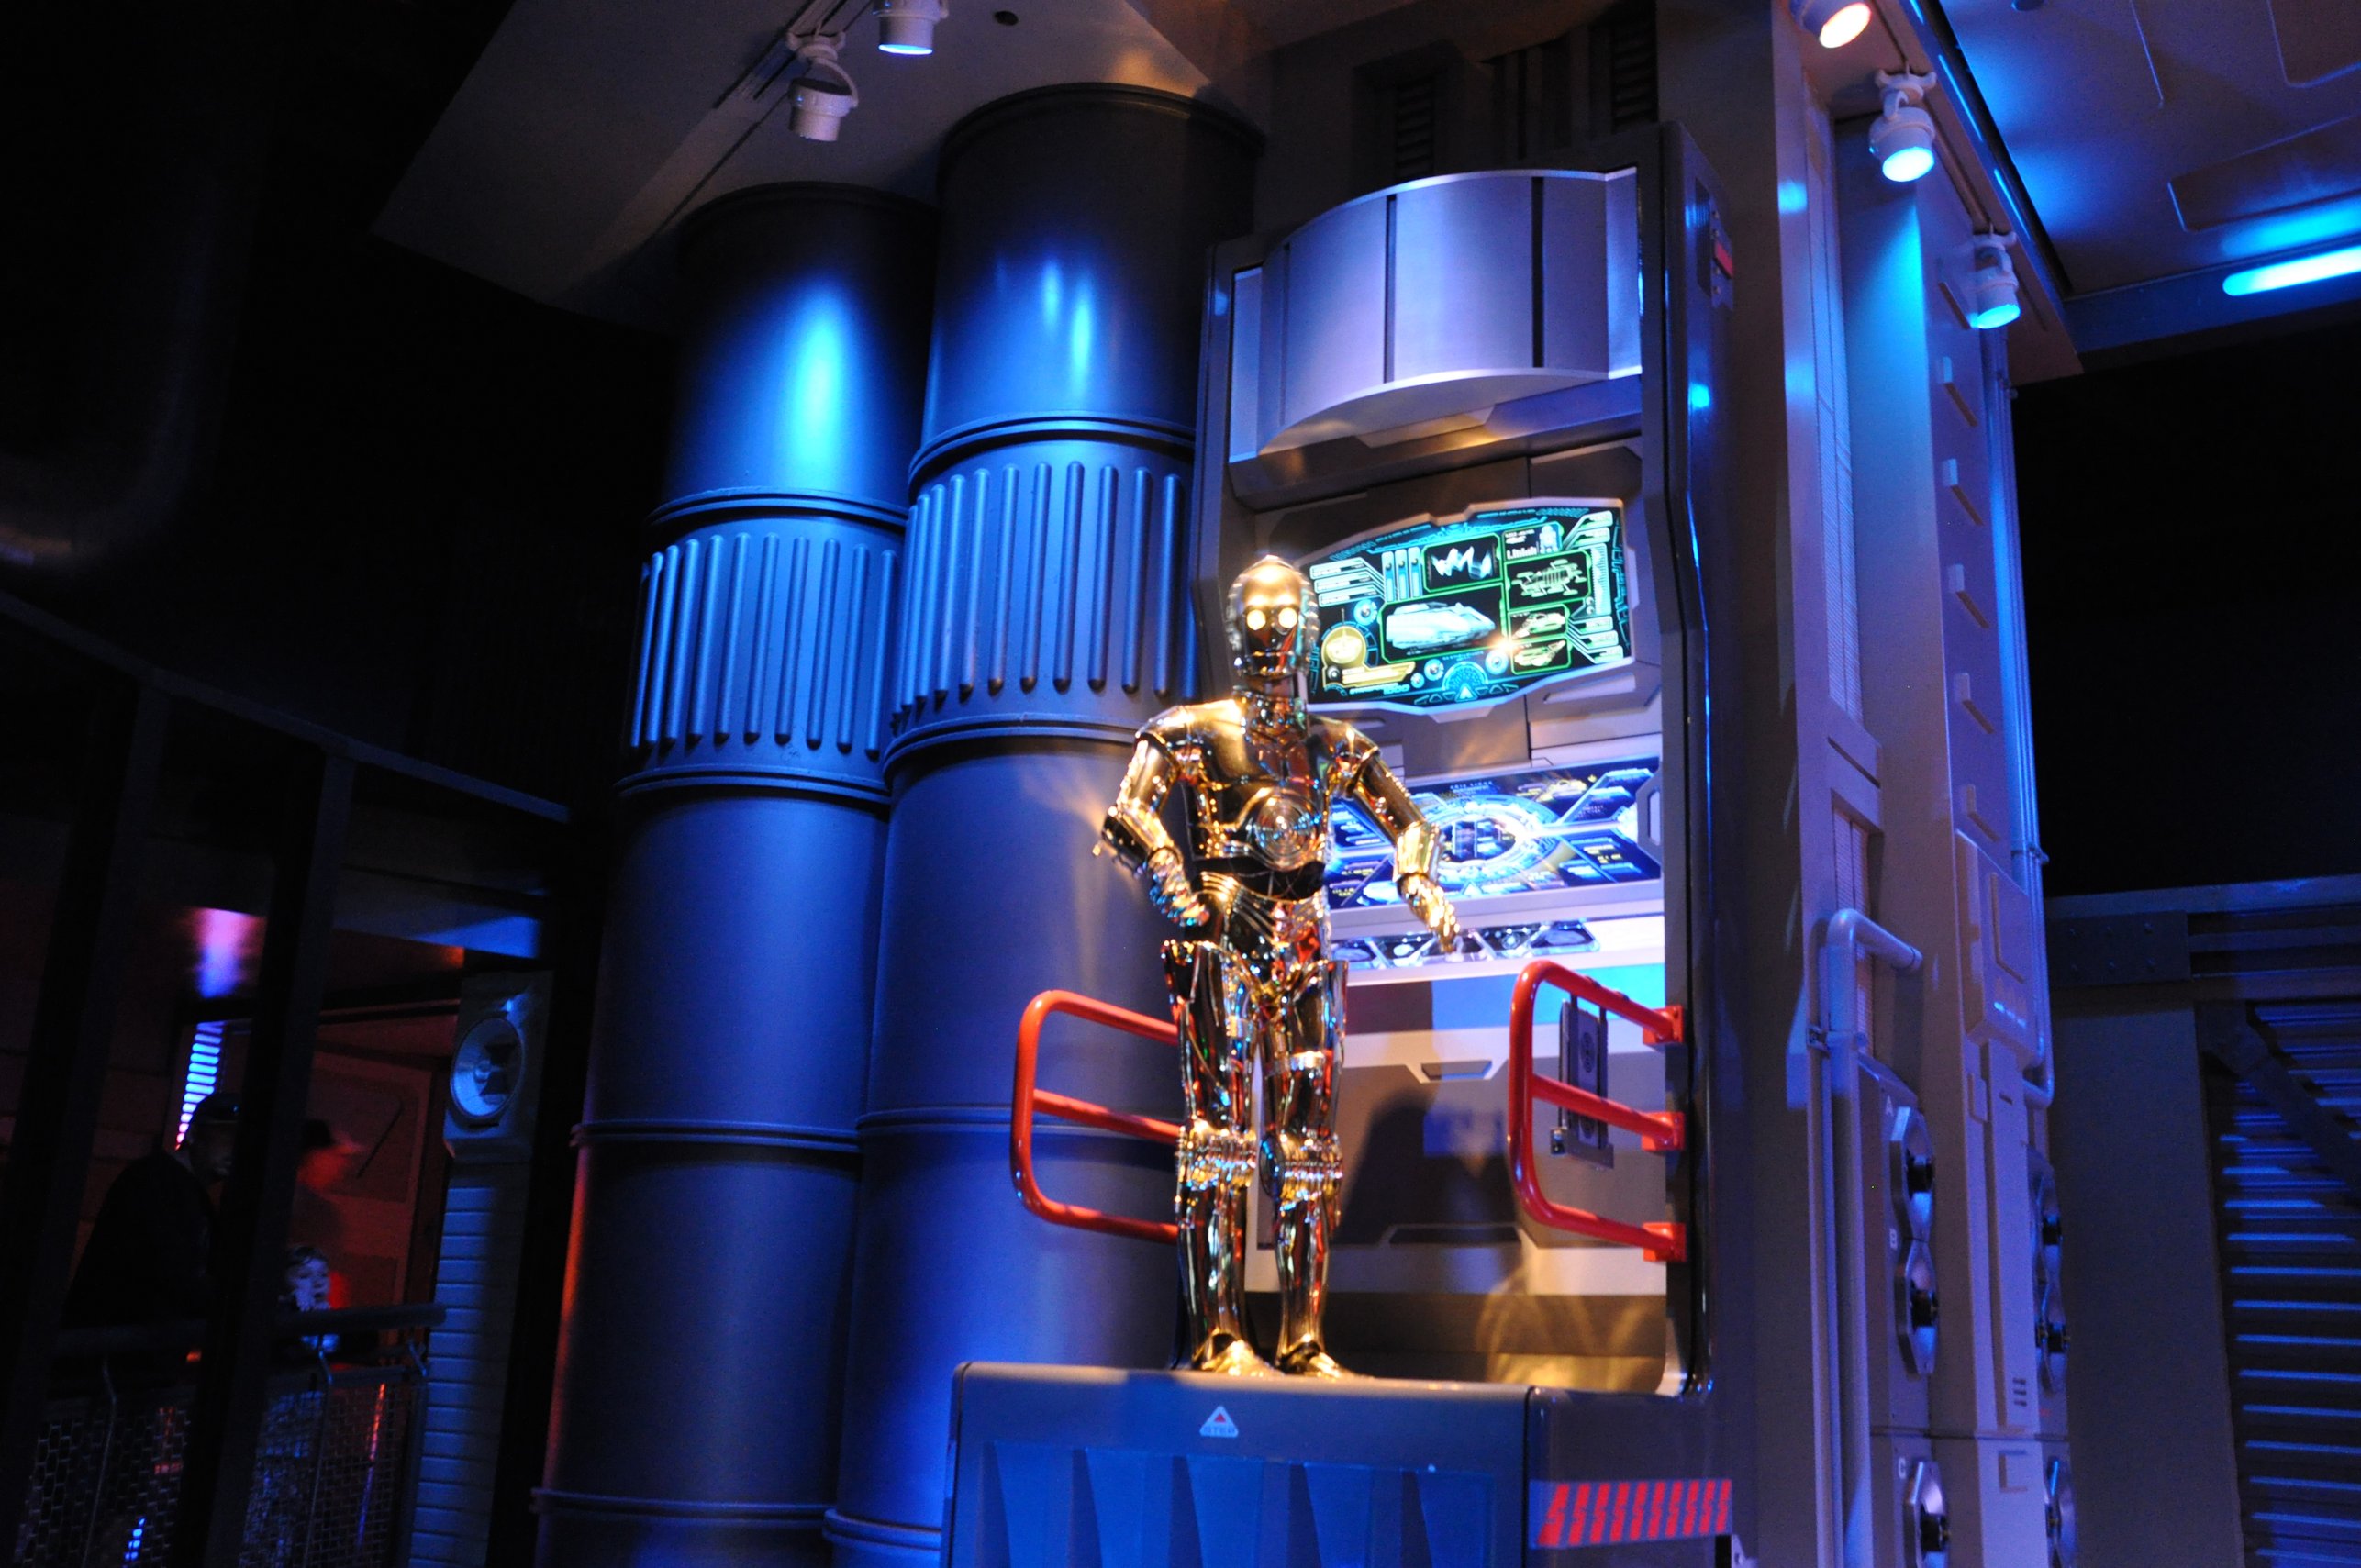 C3PO was on duty at Star Tours and kept us entertained while waiting in line.